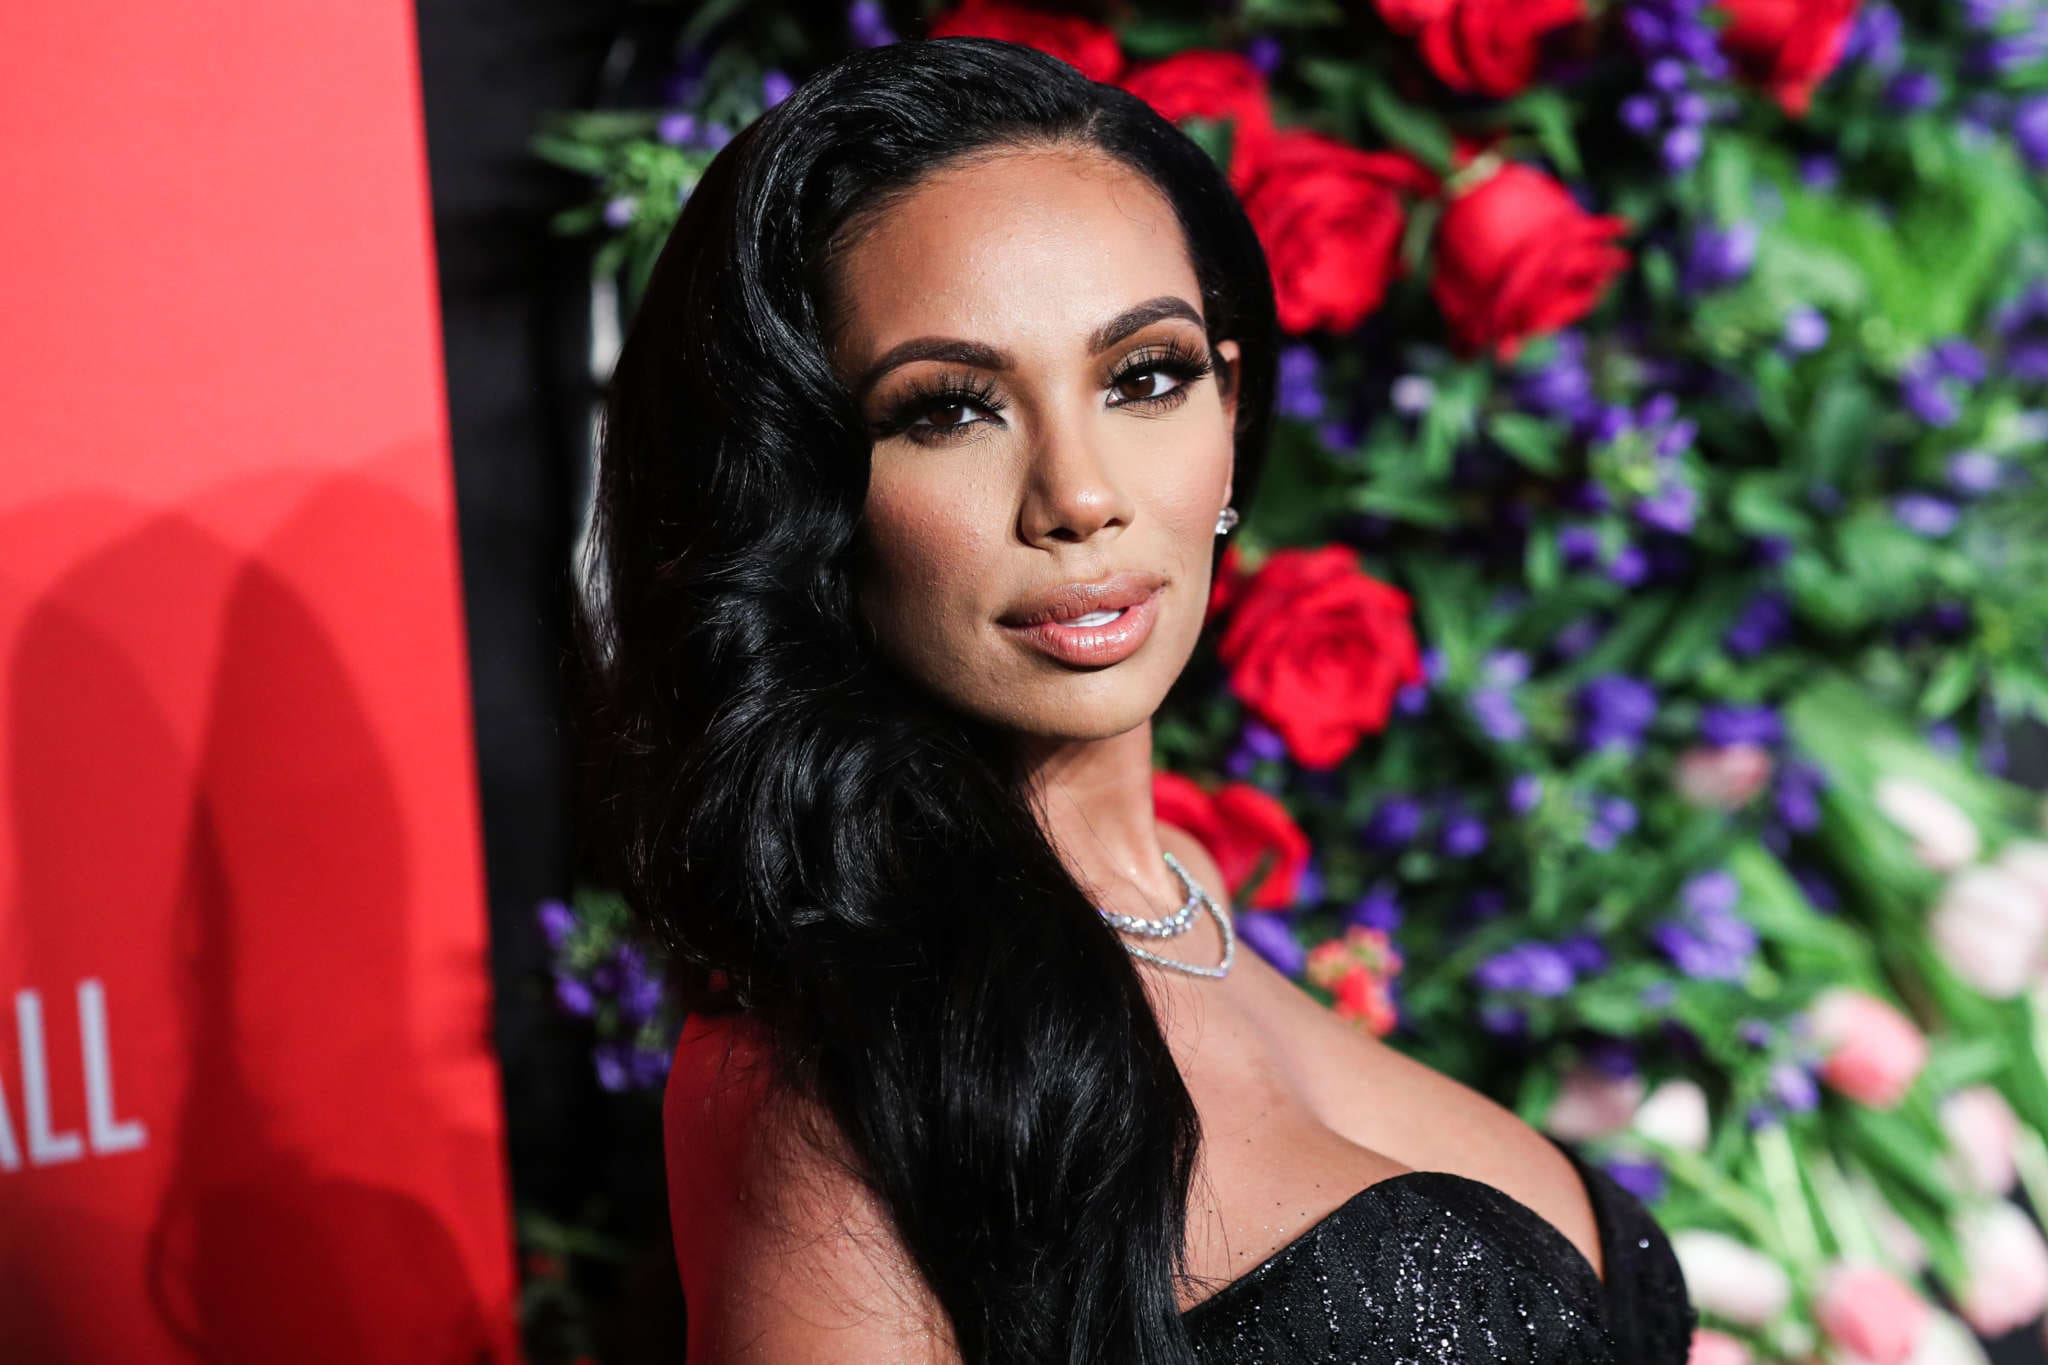 Erica Mena Breaks The Internet And Shows Off Her Beach Body In A Skimpy Swimsuit - Check Out Her Curves